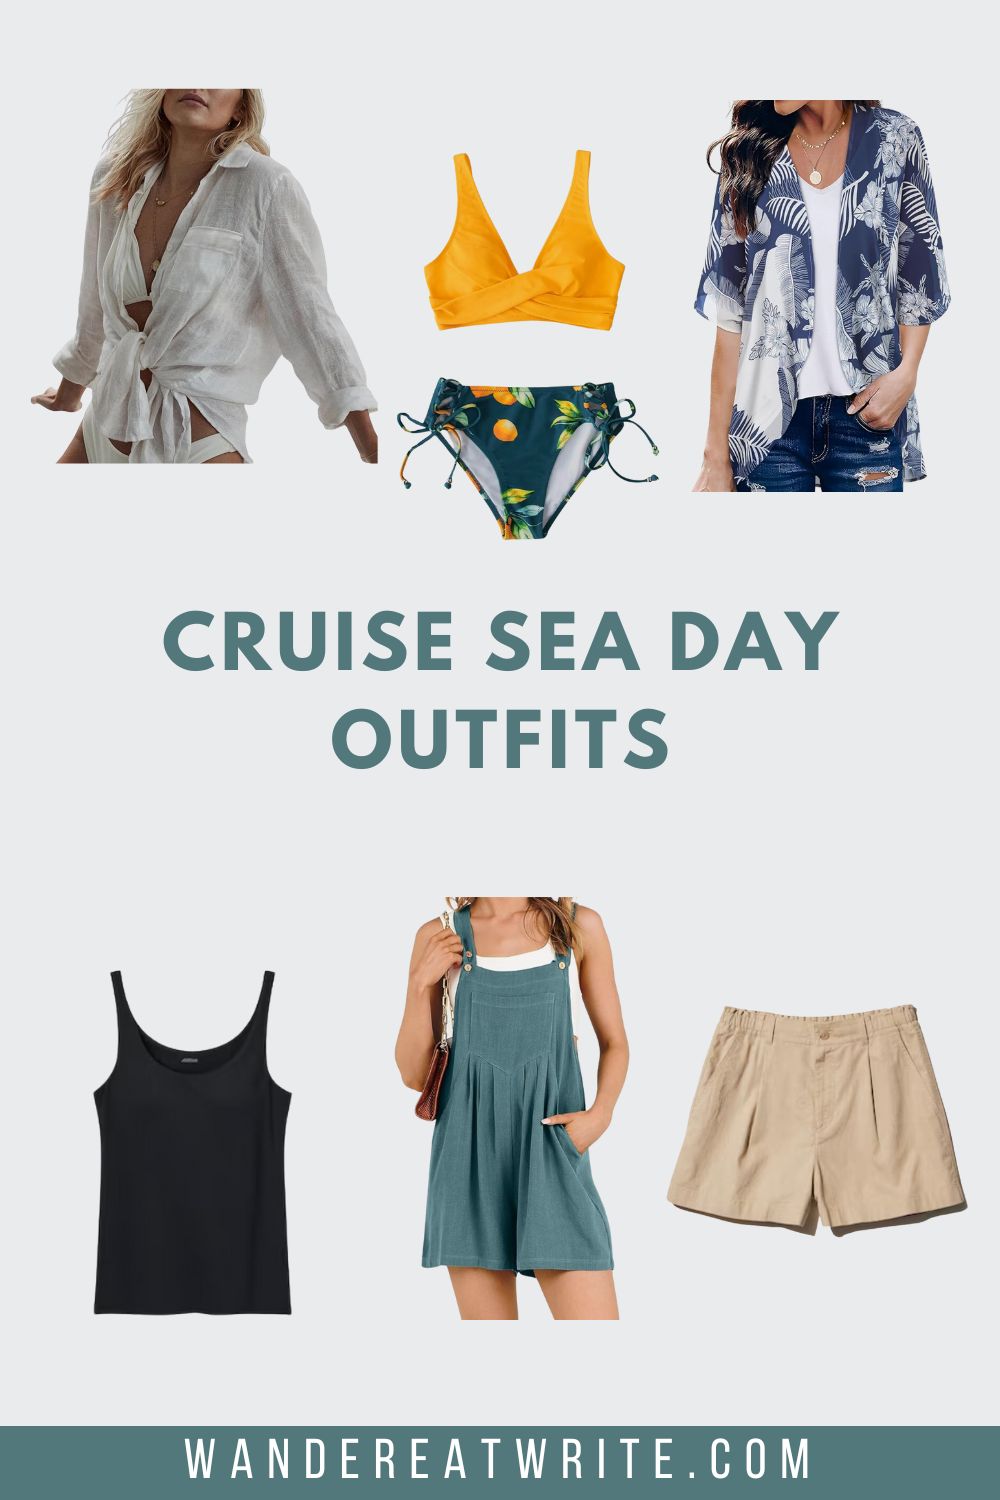 Cruise sea day outfit ideas for women. Photos clockwise from top left: white button down shirt, two-piece bikini with a yellow top and teal bottoms, navy kimono cardigan with white feather pattern, beige linen shorts, teal shorts romper, black tank top